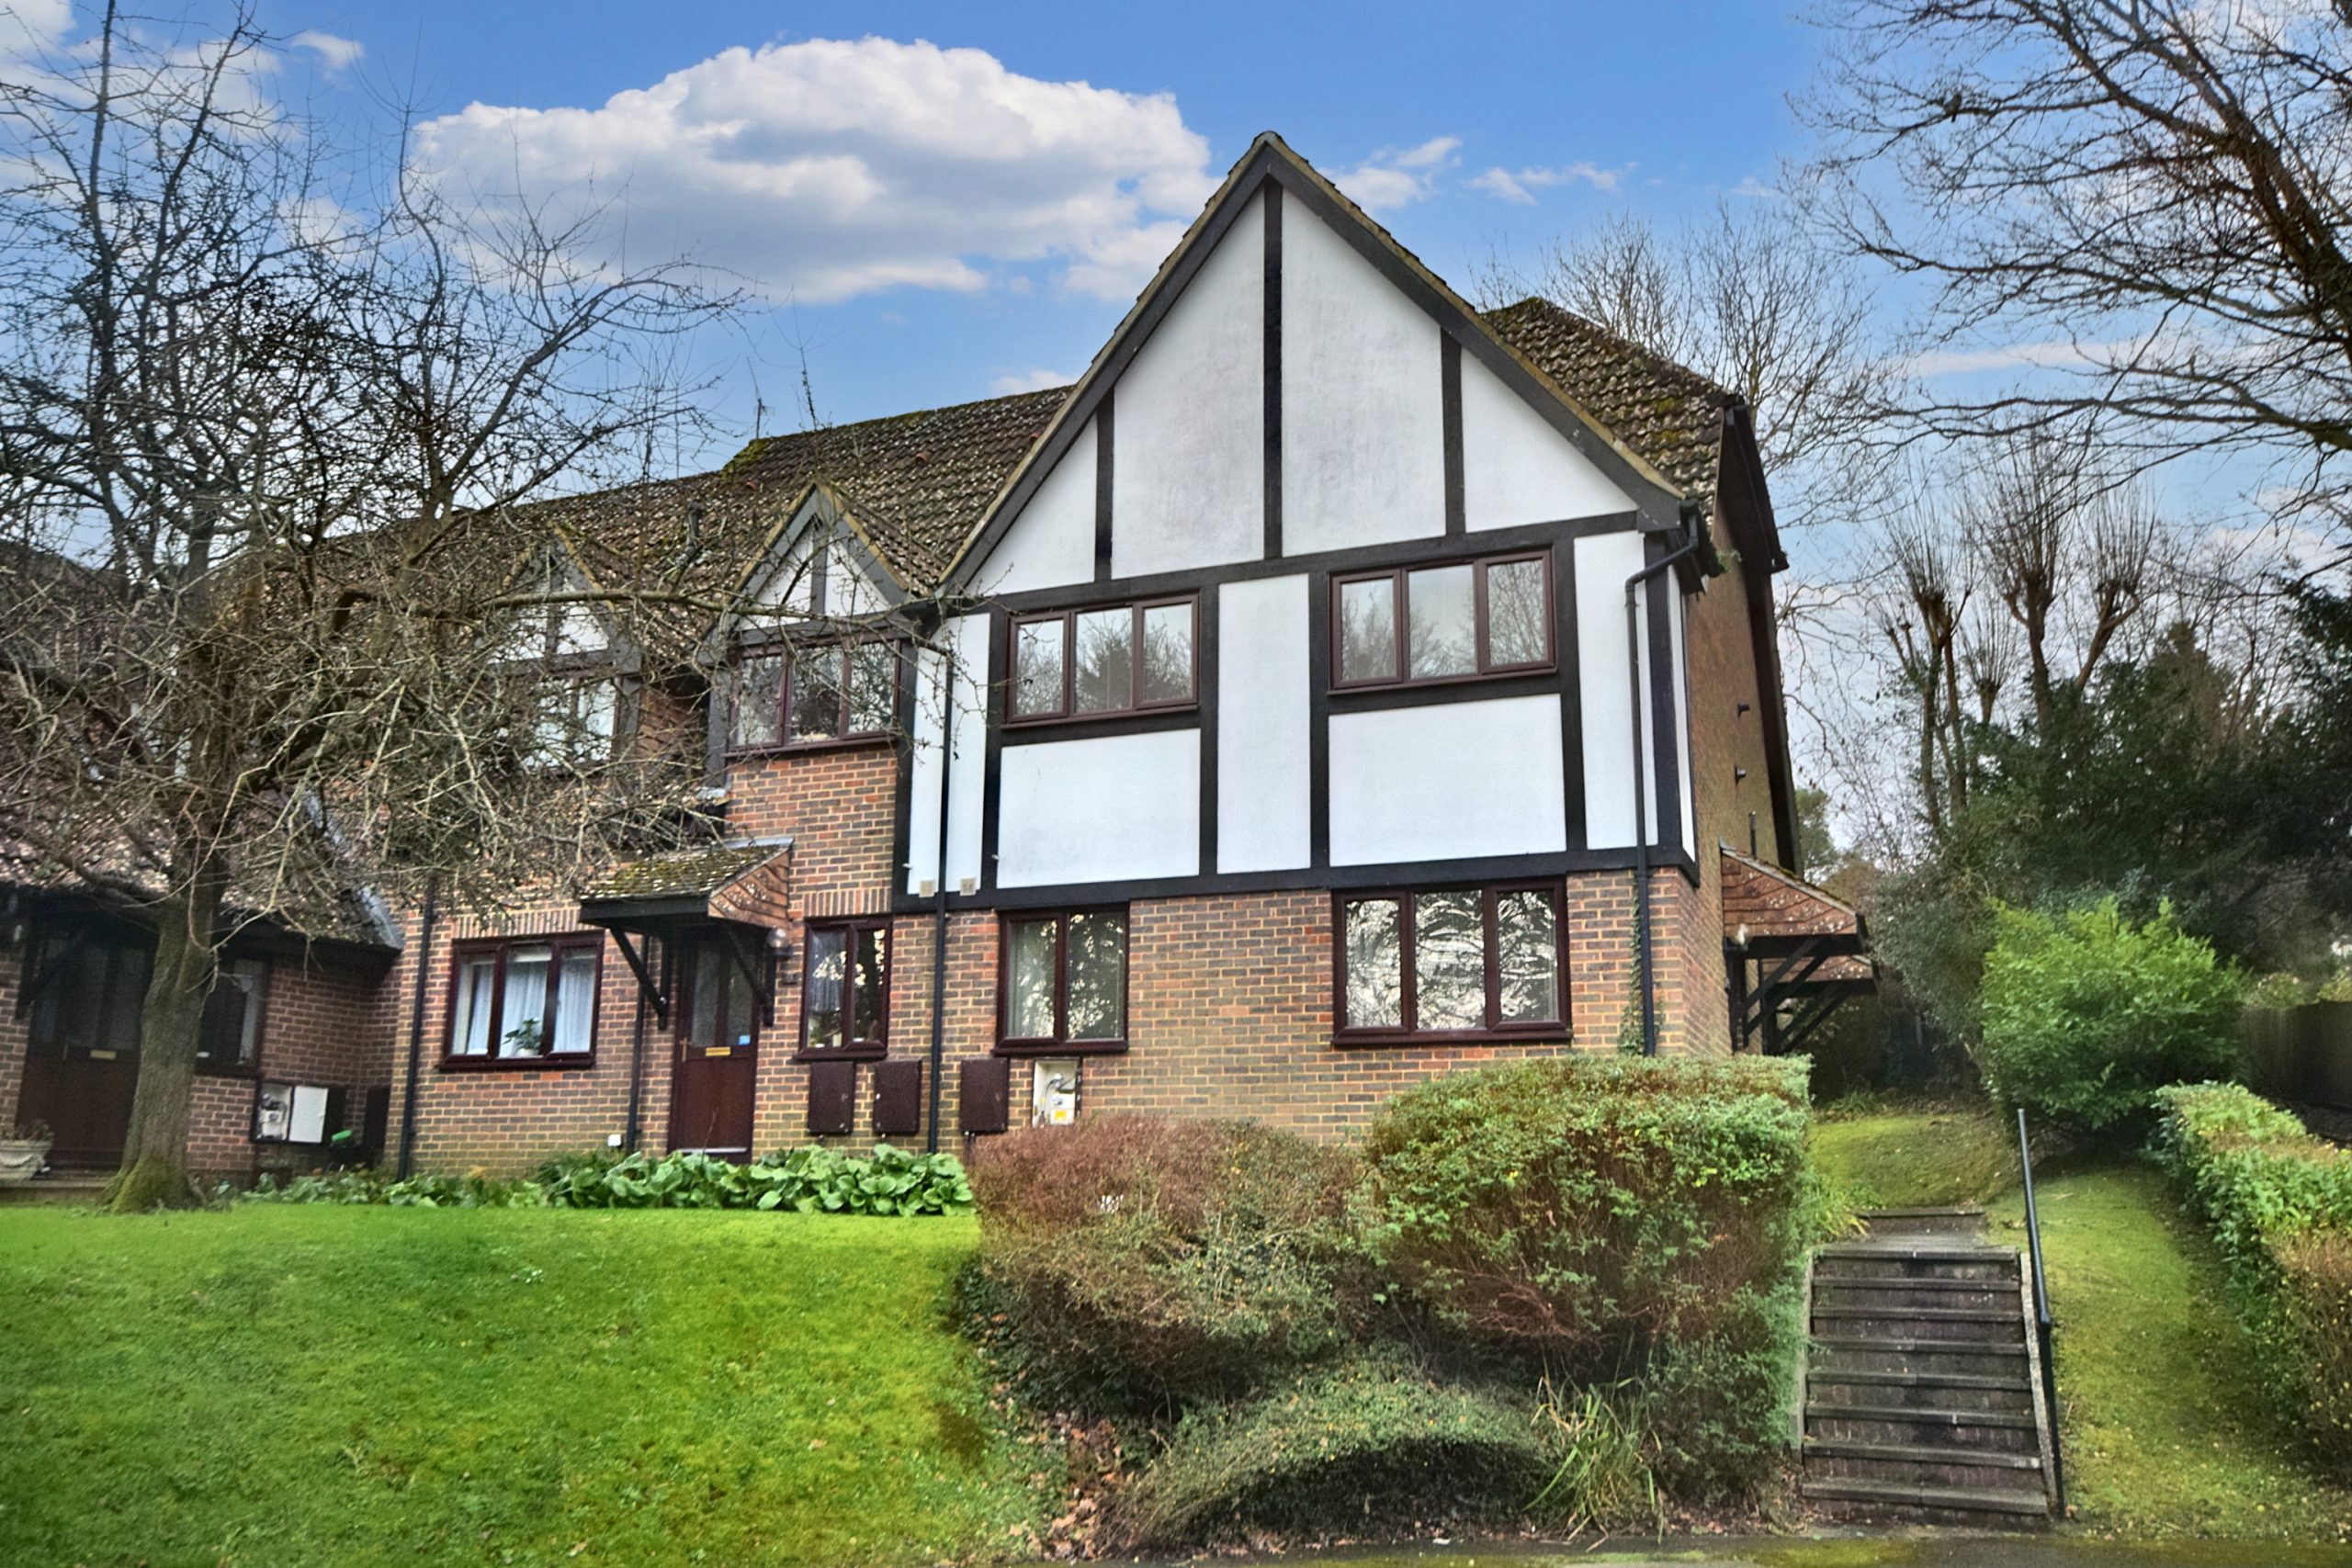 Another sale agreed – board turns to sold subject to contract, tomorrow in South Farnham